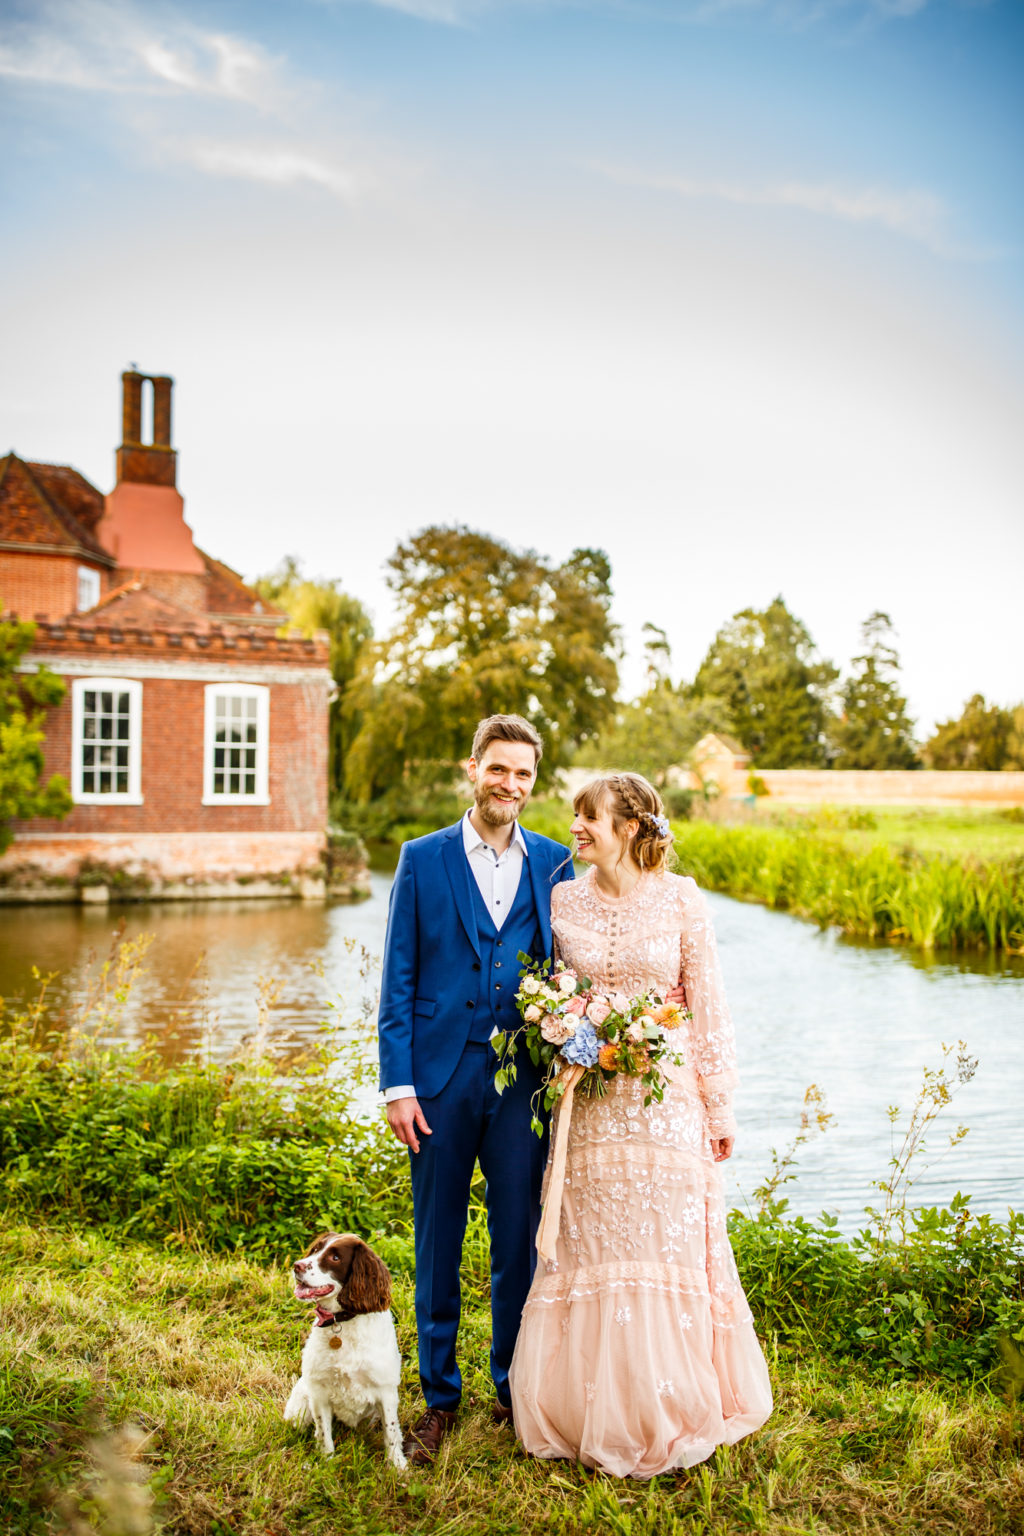 An Intimate and Ethical Civil Partnership At Boxted Hall, Suffolk